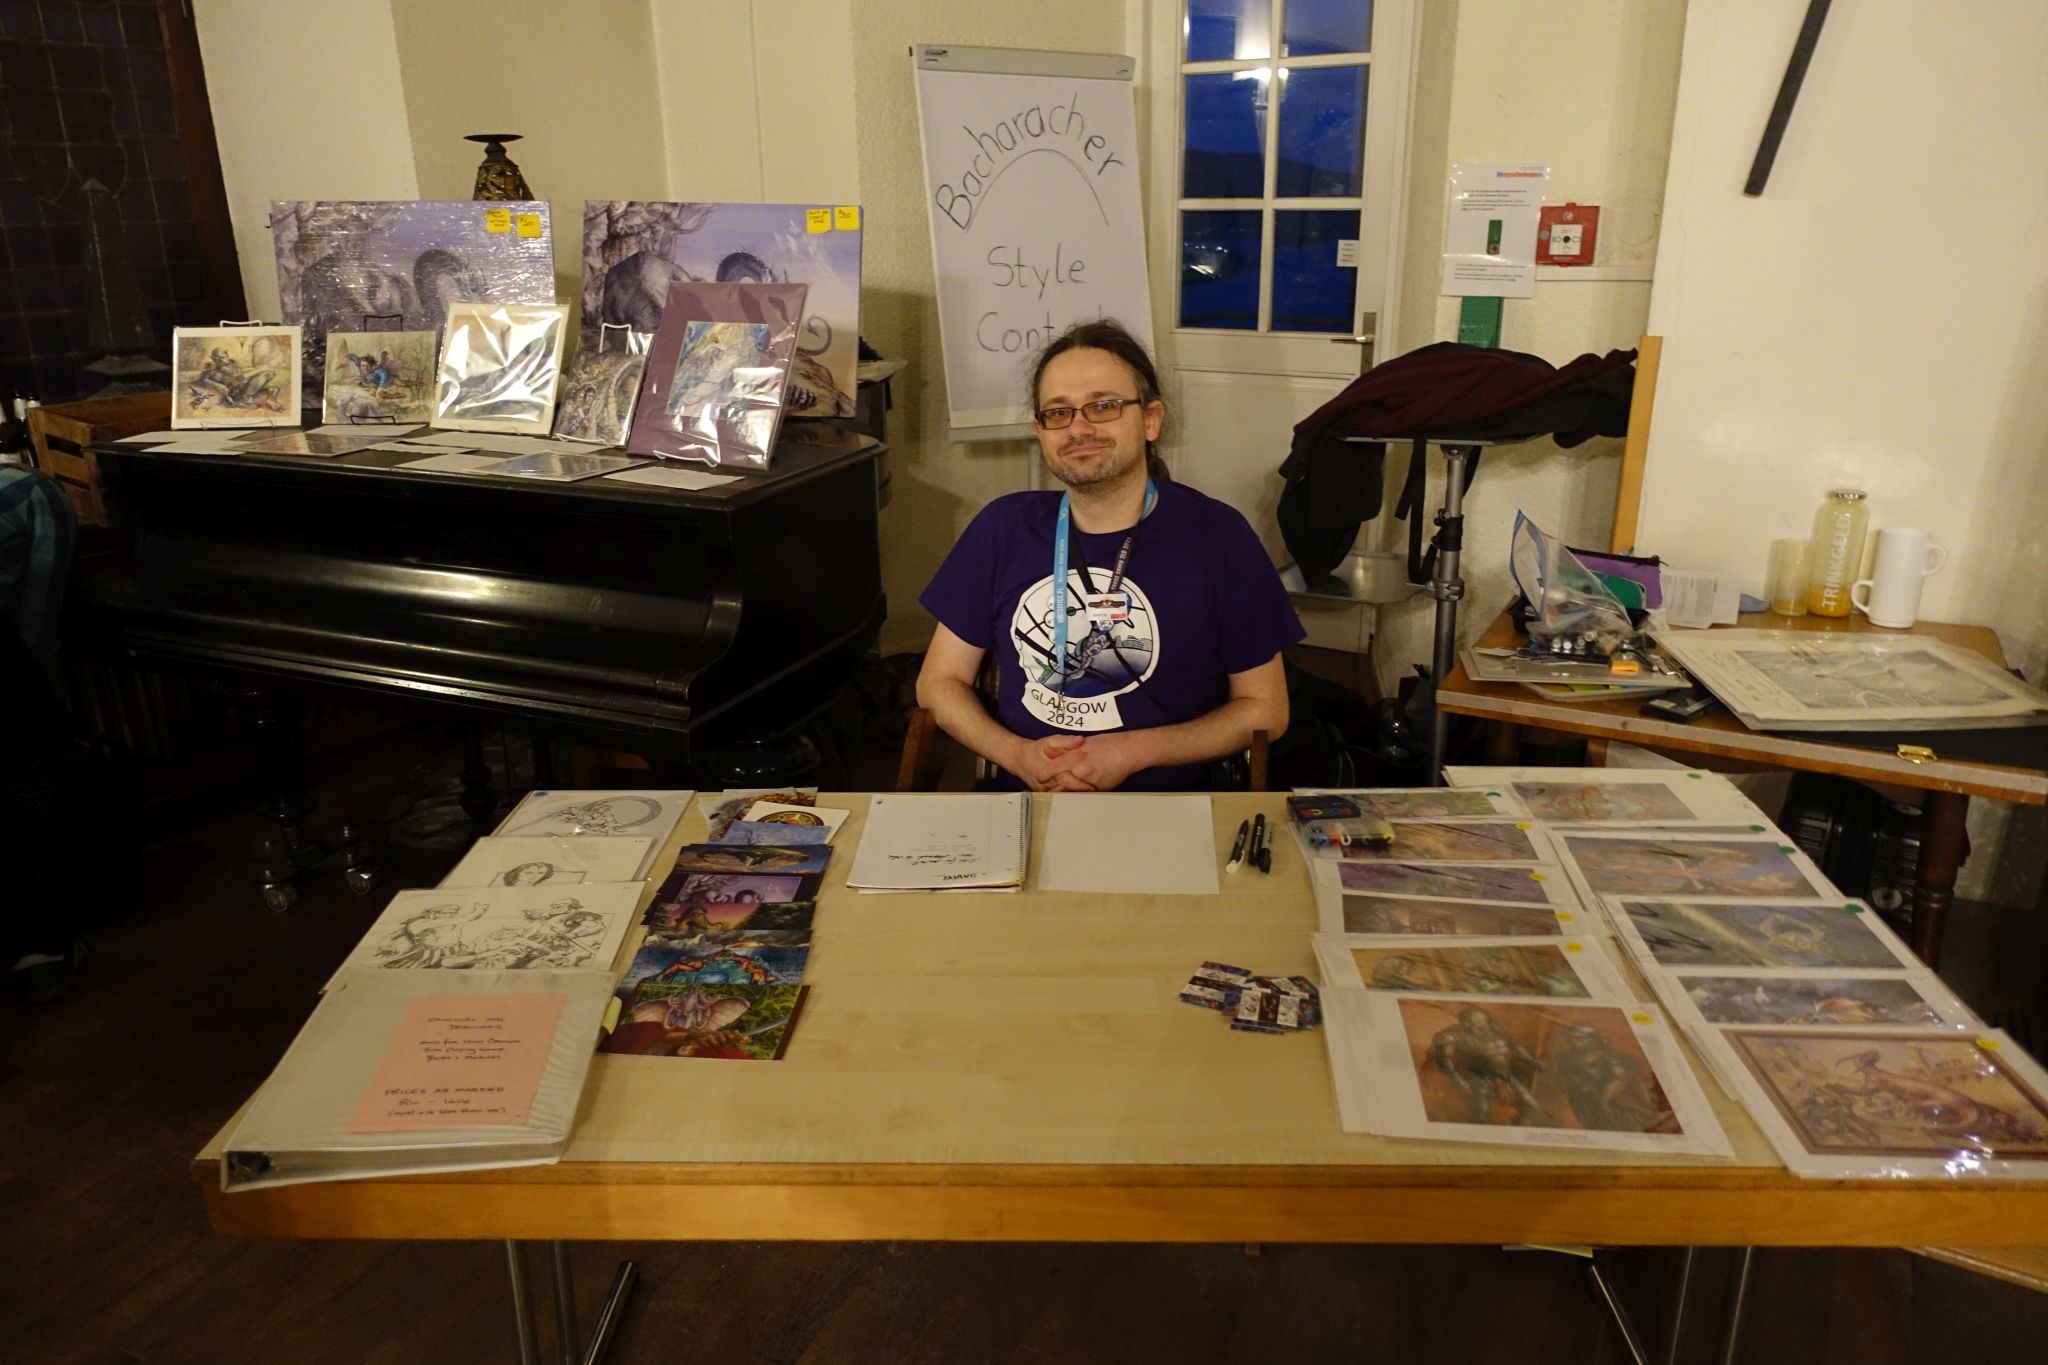 A man in purple t-shirt sits behind a table. There are art prints and posters on the table.